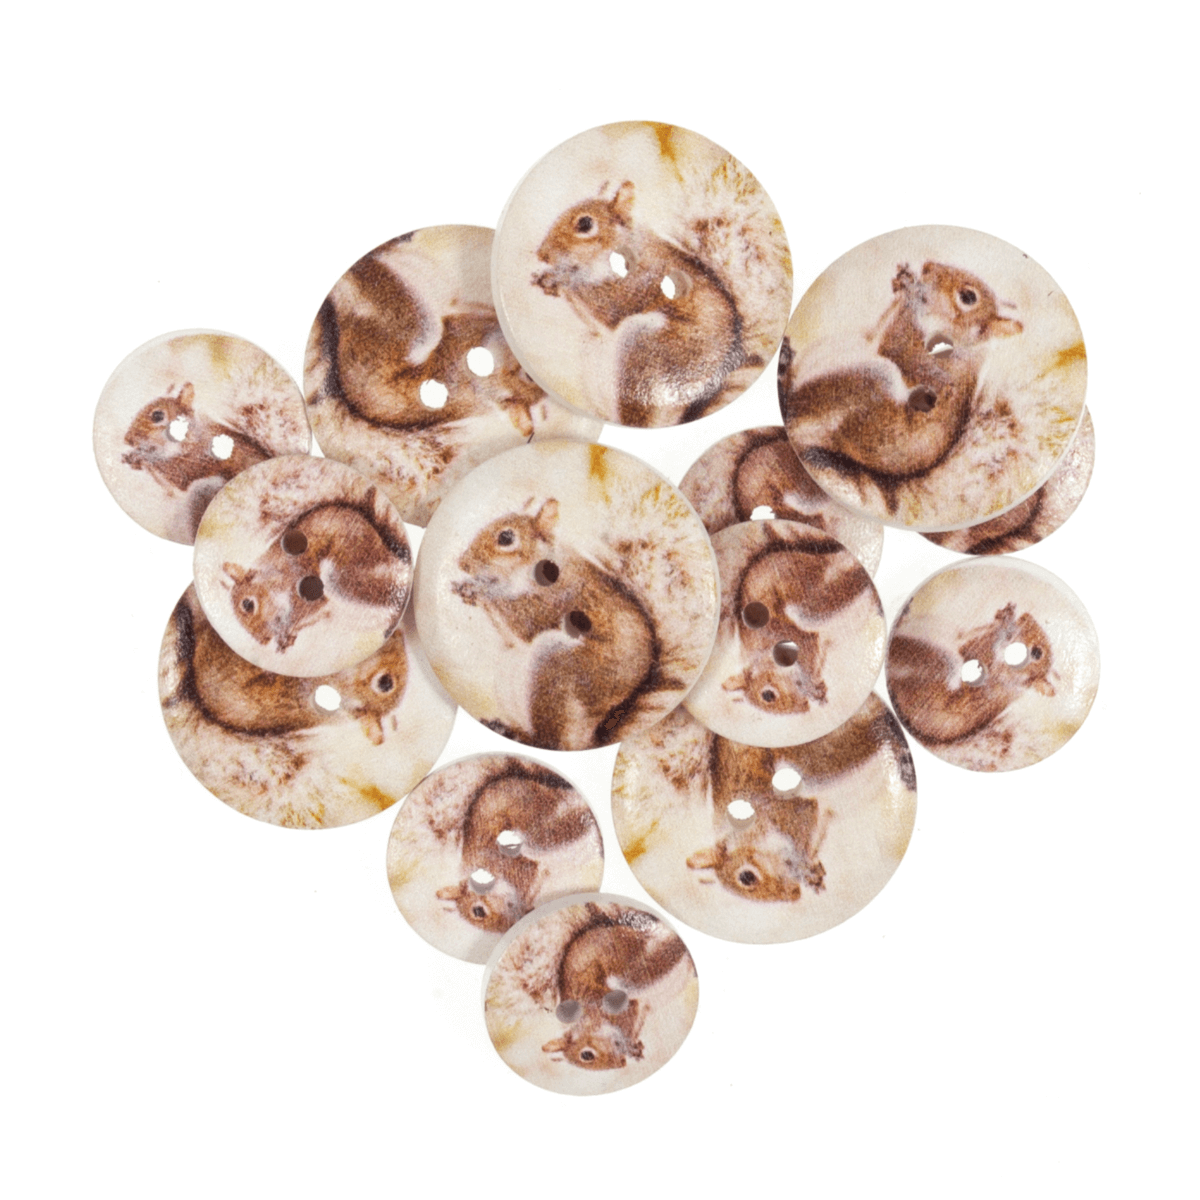 Assorted Bushy Tail Squirrel Wooden Buttons 15 Pack Sizes From 15mm - 25mm